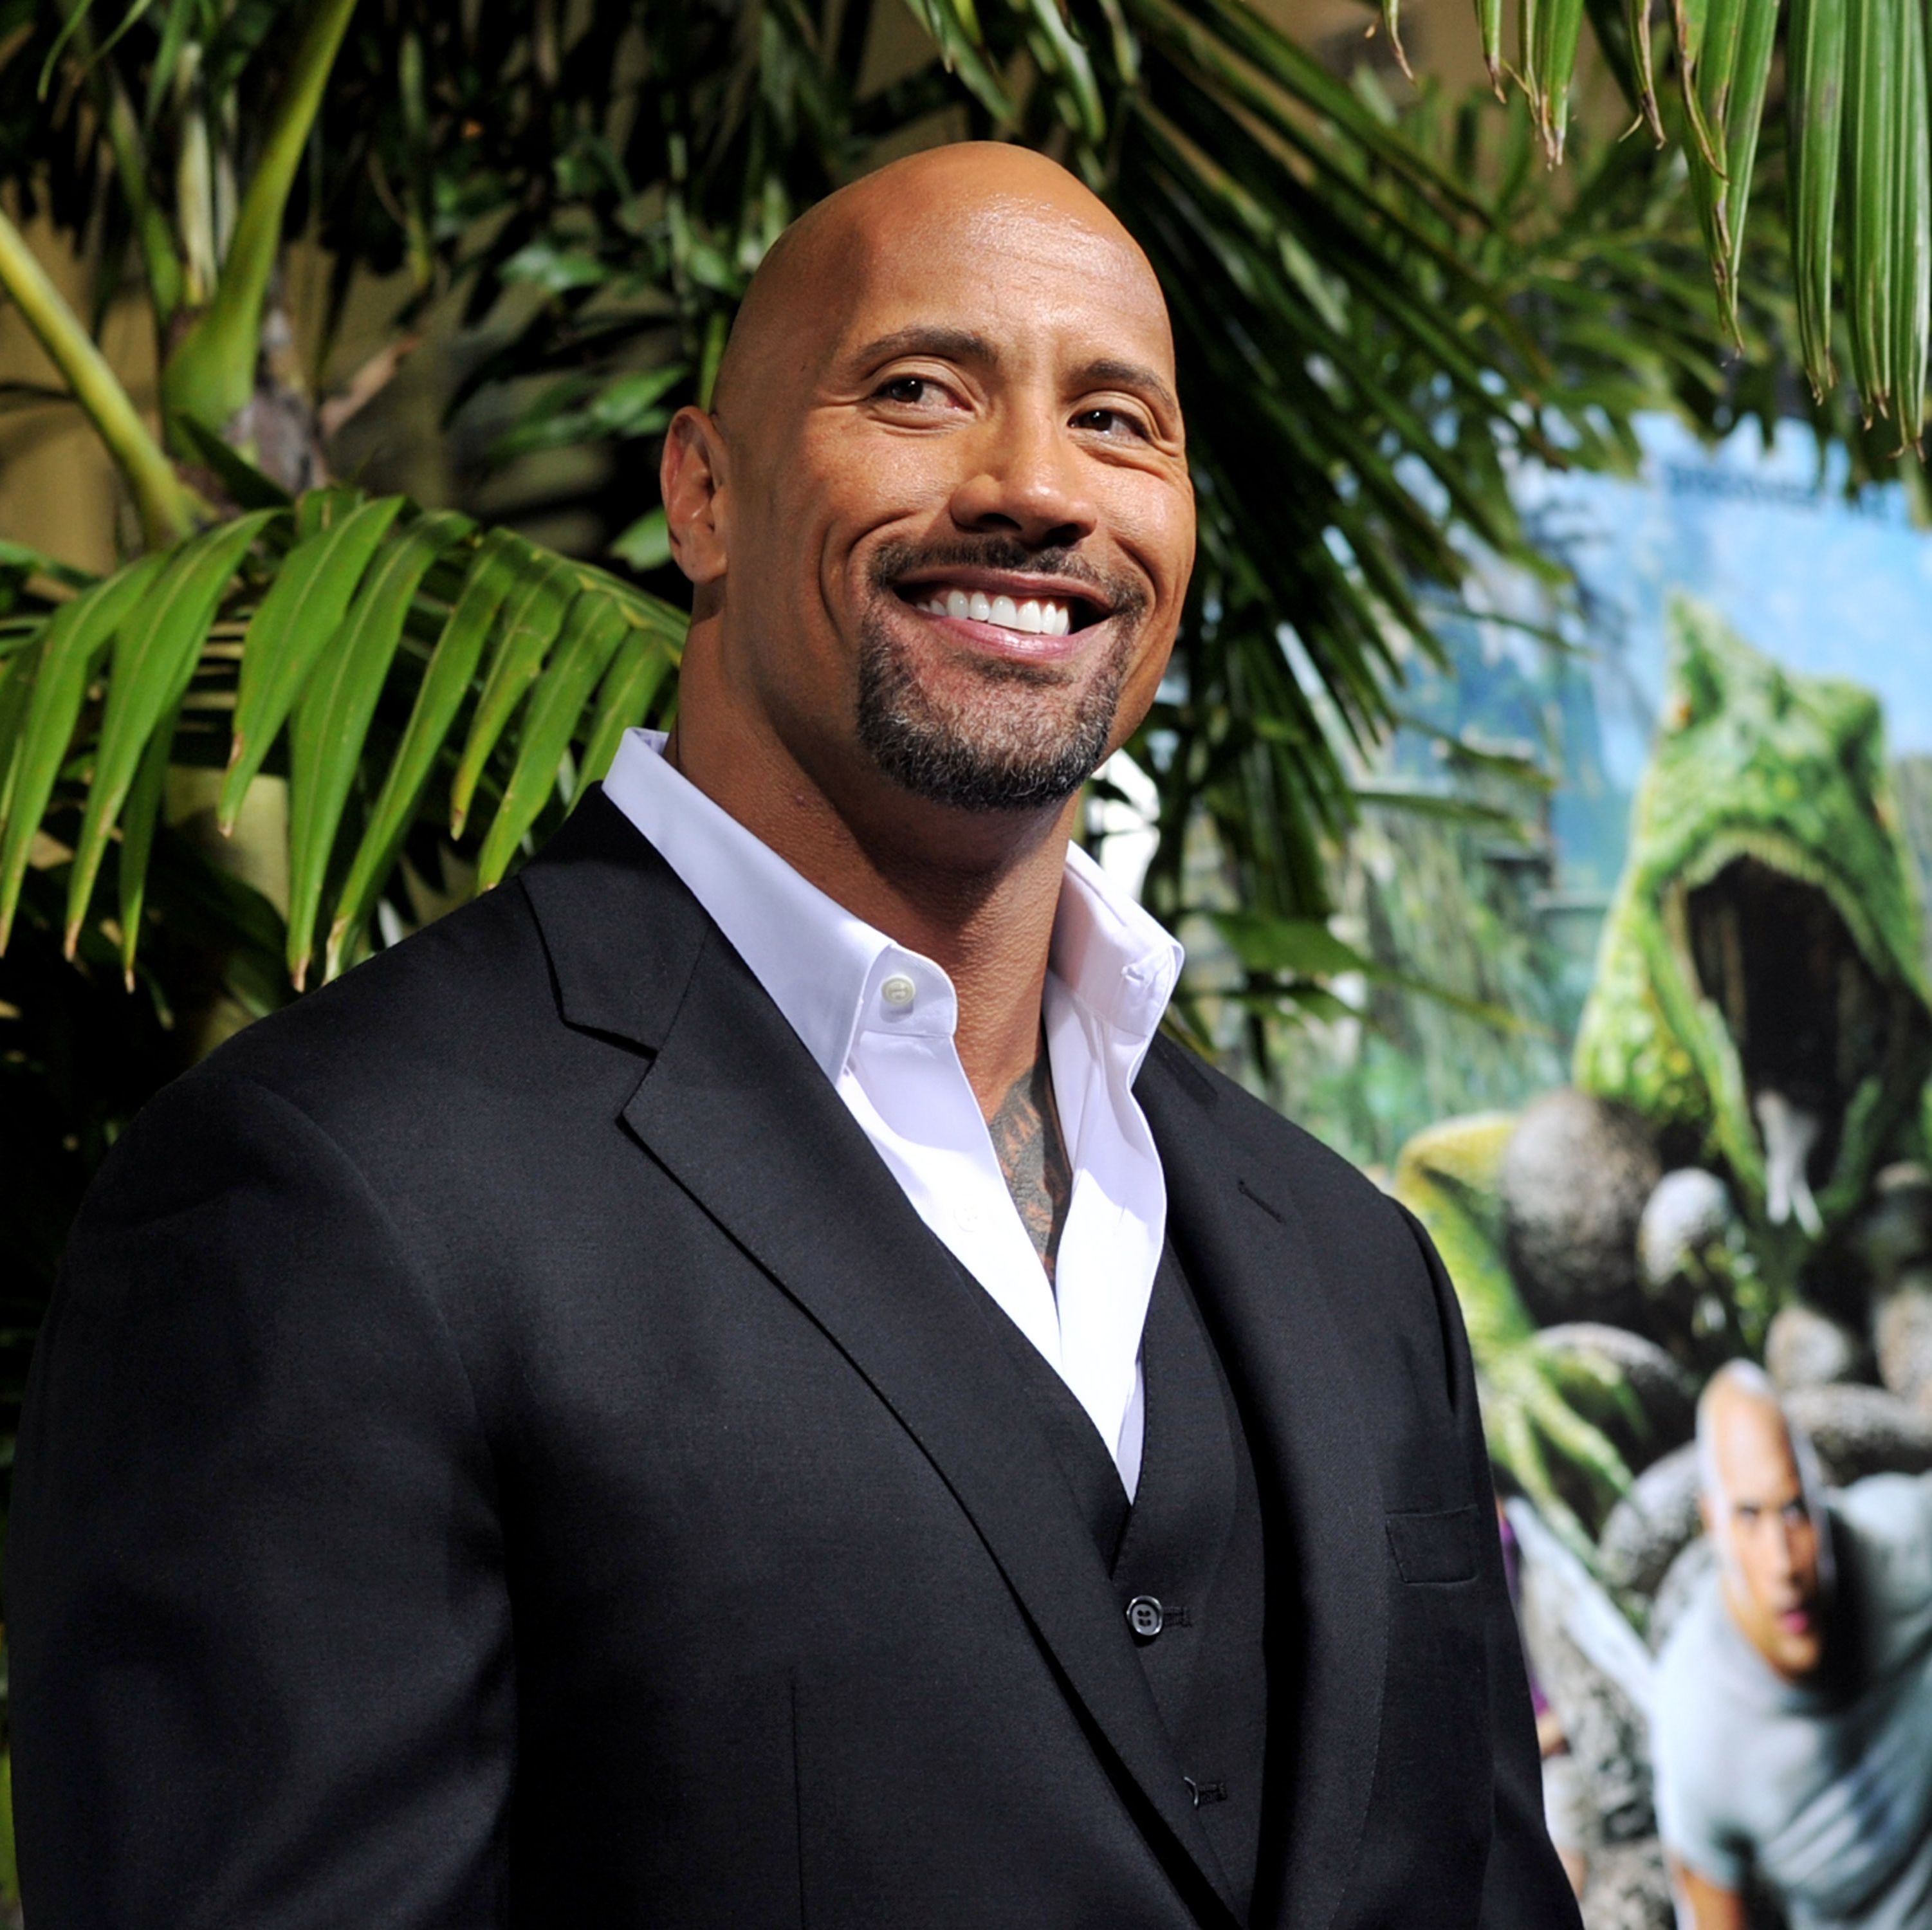 Watch The Rock Surprise His Mom with a New Car for Christmas